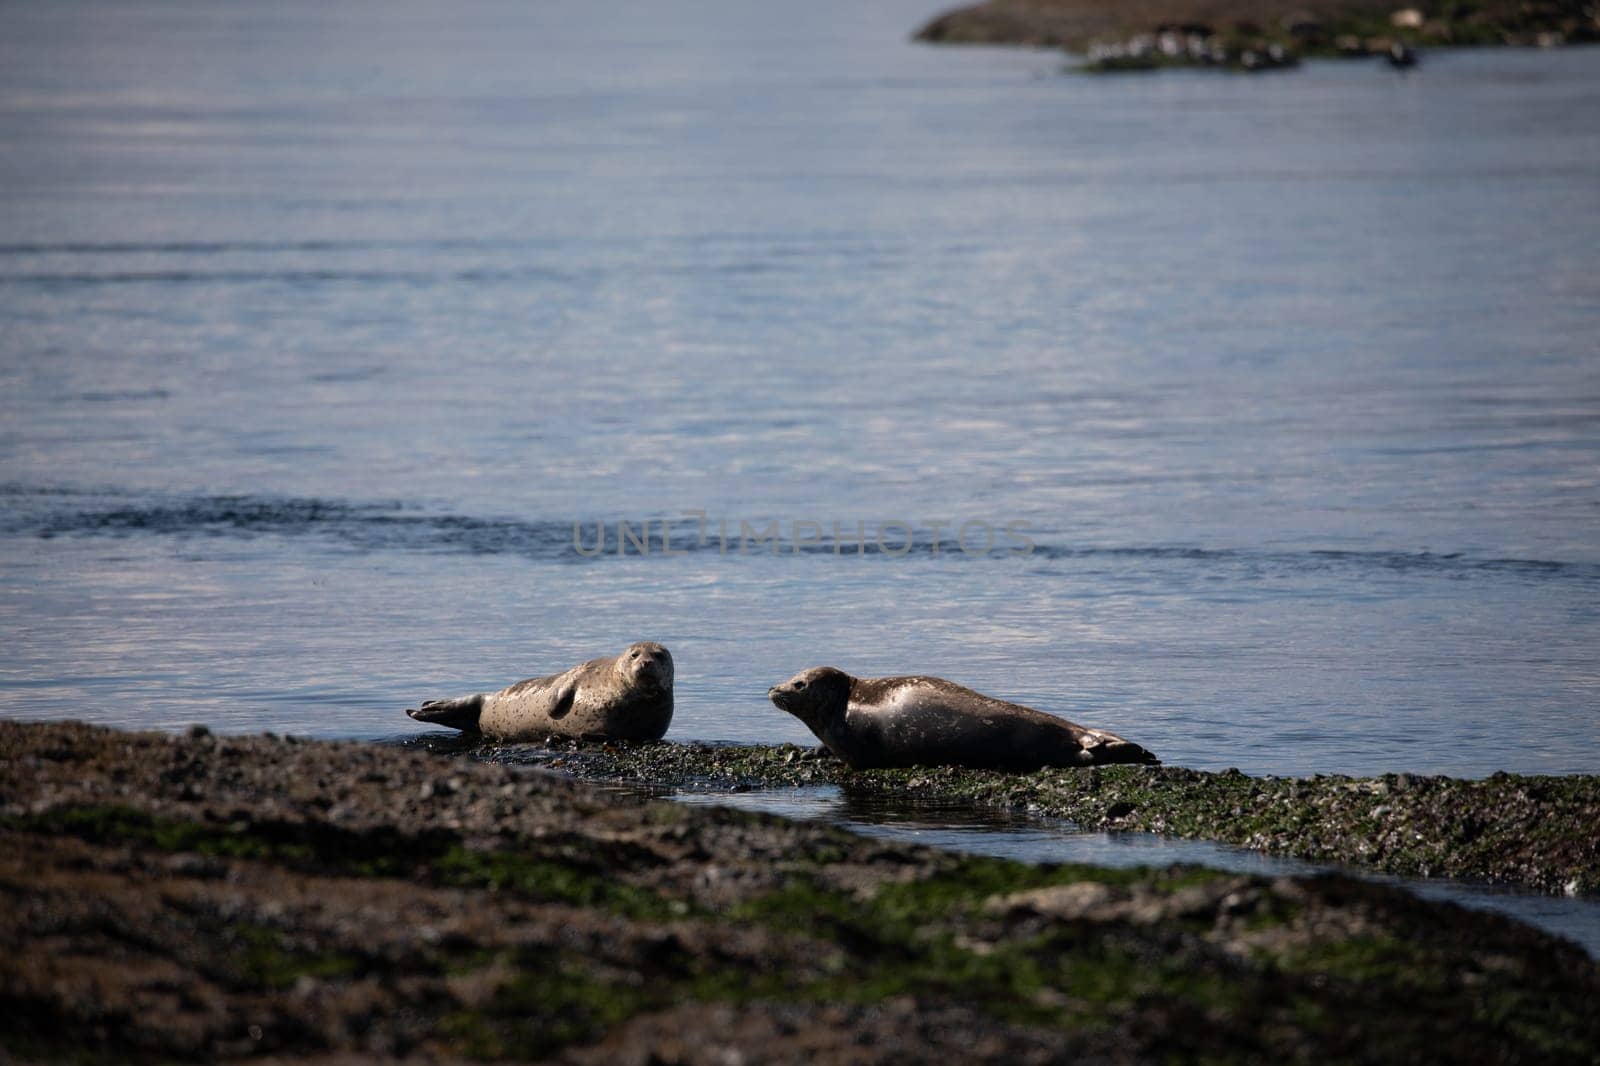 Harbor Seal or Common Seal in British Columbia Canada hauled out on rocks by Granchinho